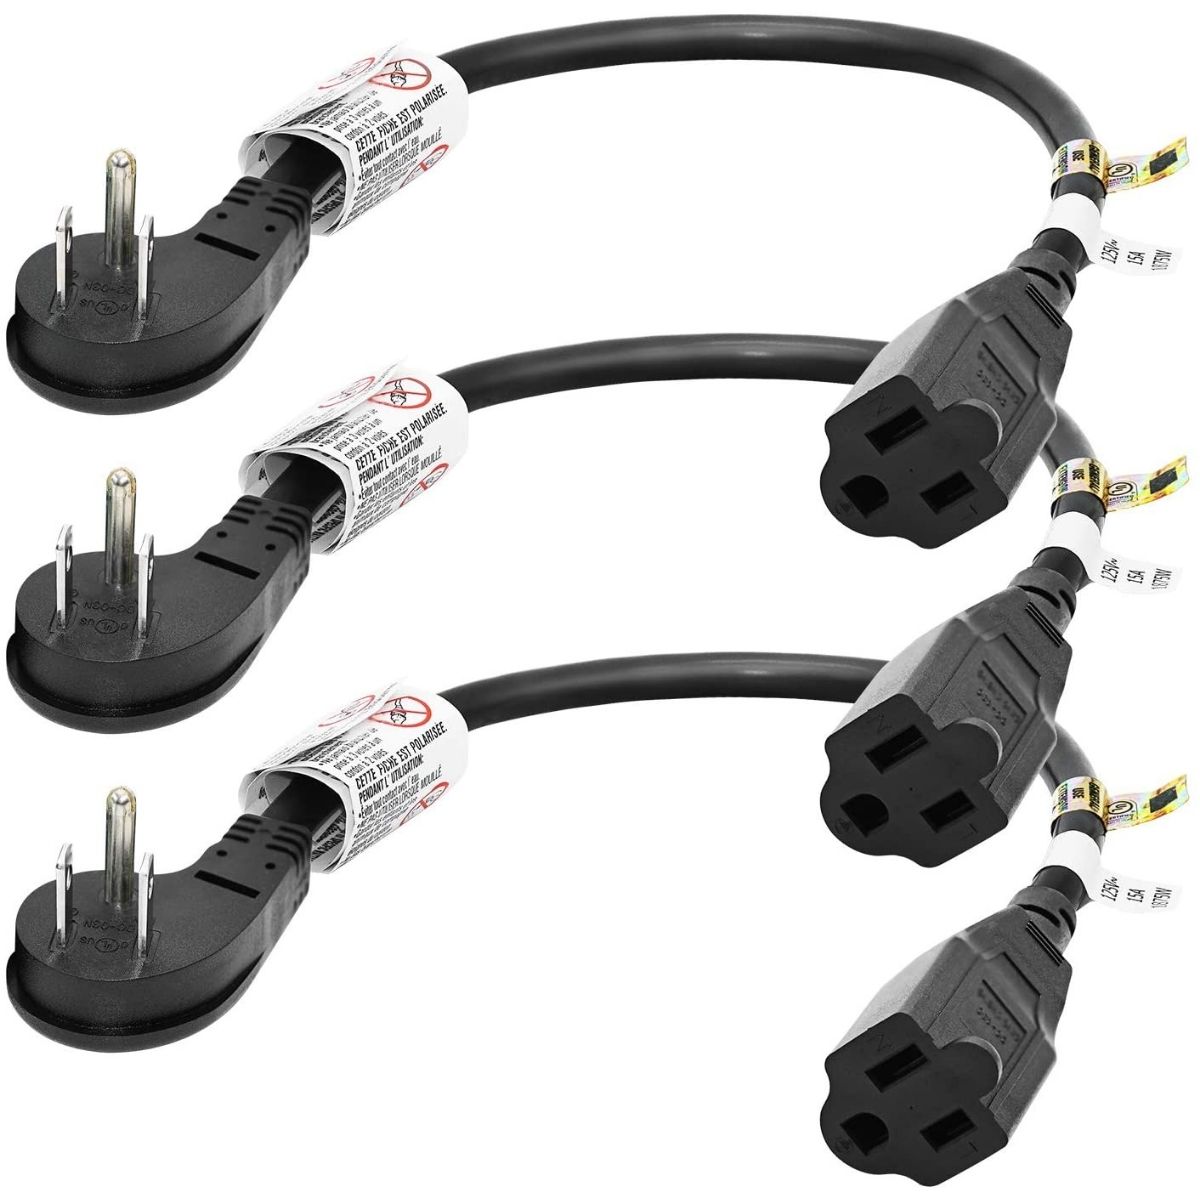 Firmerst Low-Profile Flat Plug Extension Cord